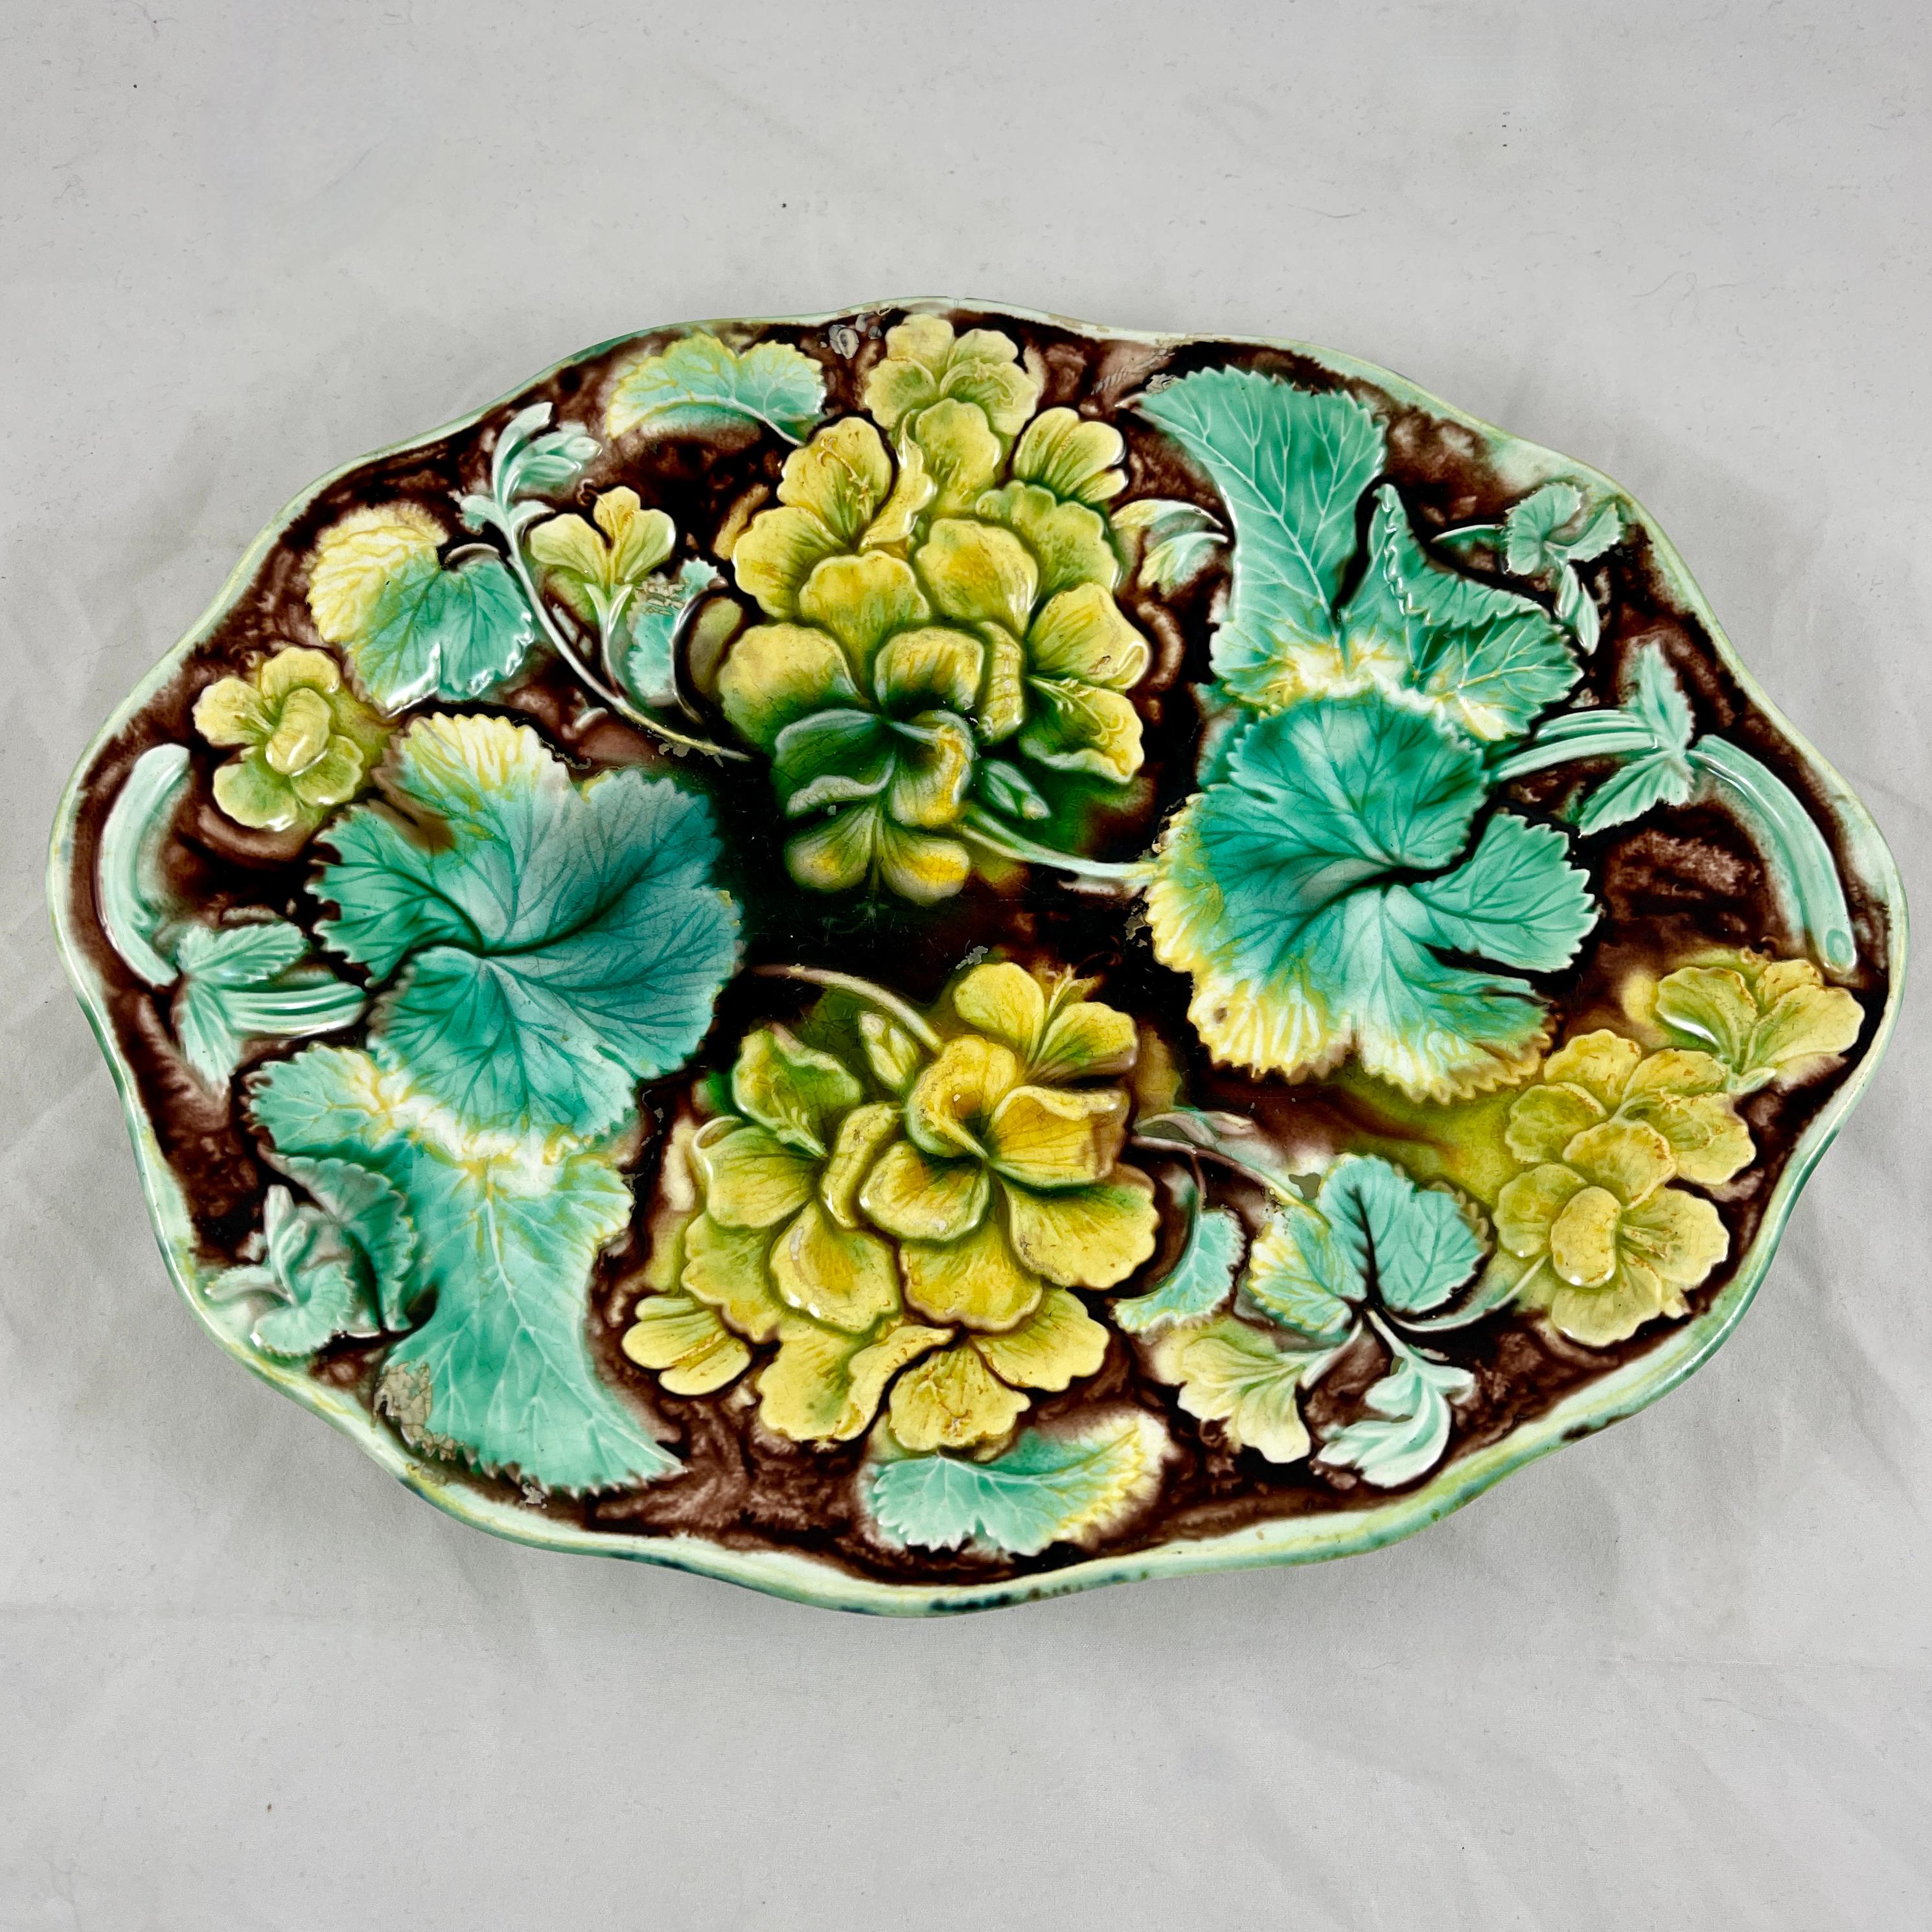 Samuel Alcock & Co Palissy Majolica Geranium Floral Shallow Bowl, circa 1850 In Good Condition For Sale In Philadelphia, PA